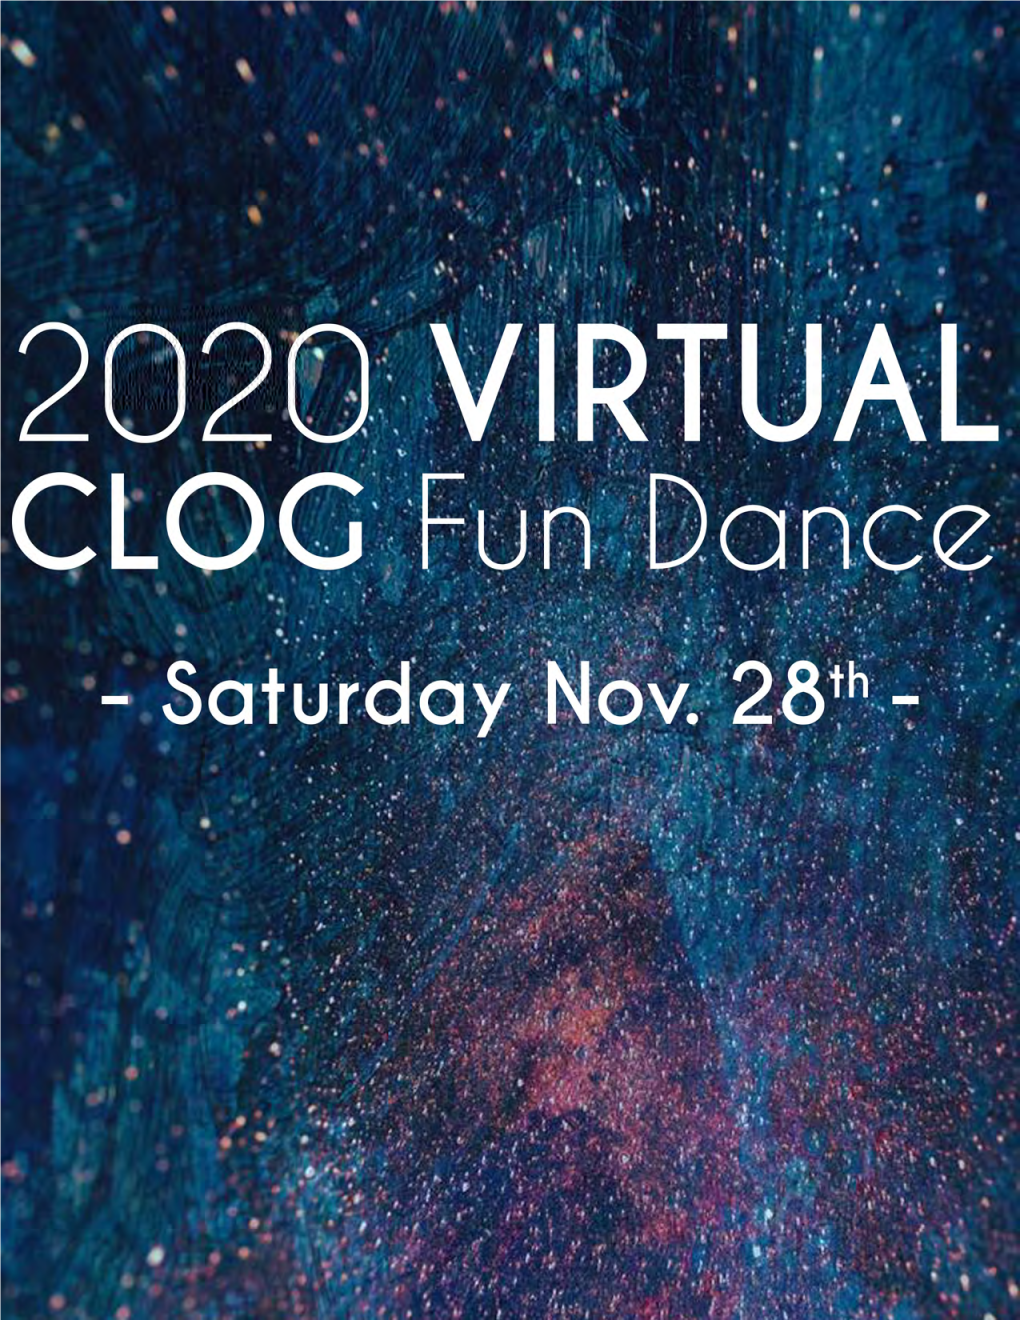 Download the Cue Sheets for the 2020 Virtual CLOG